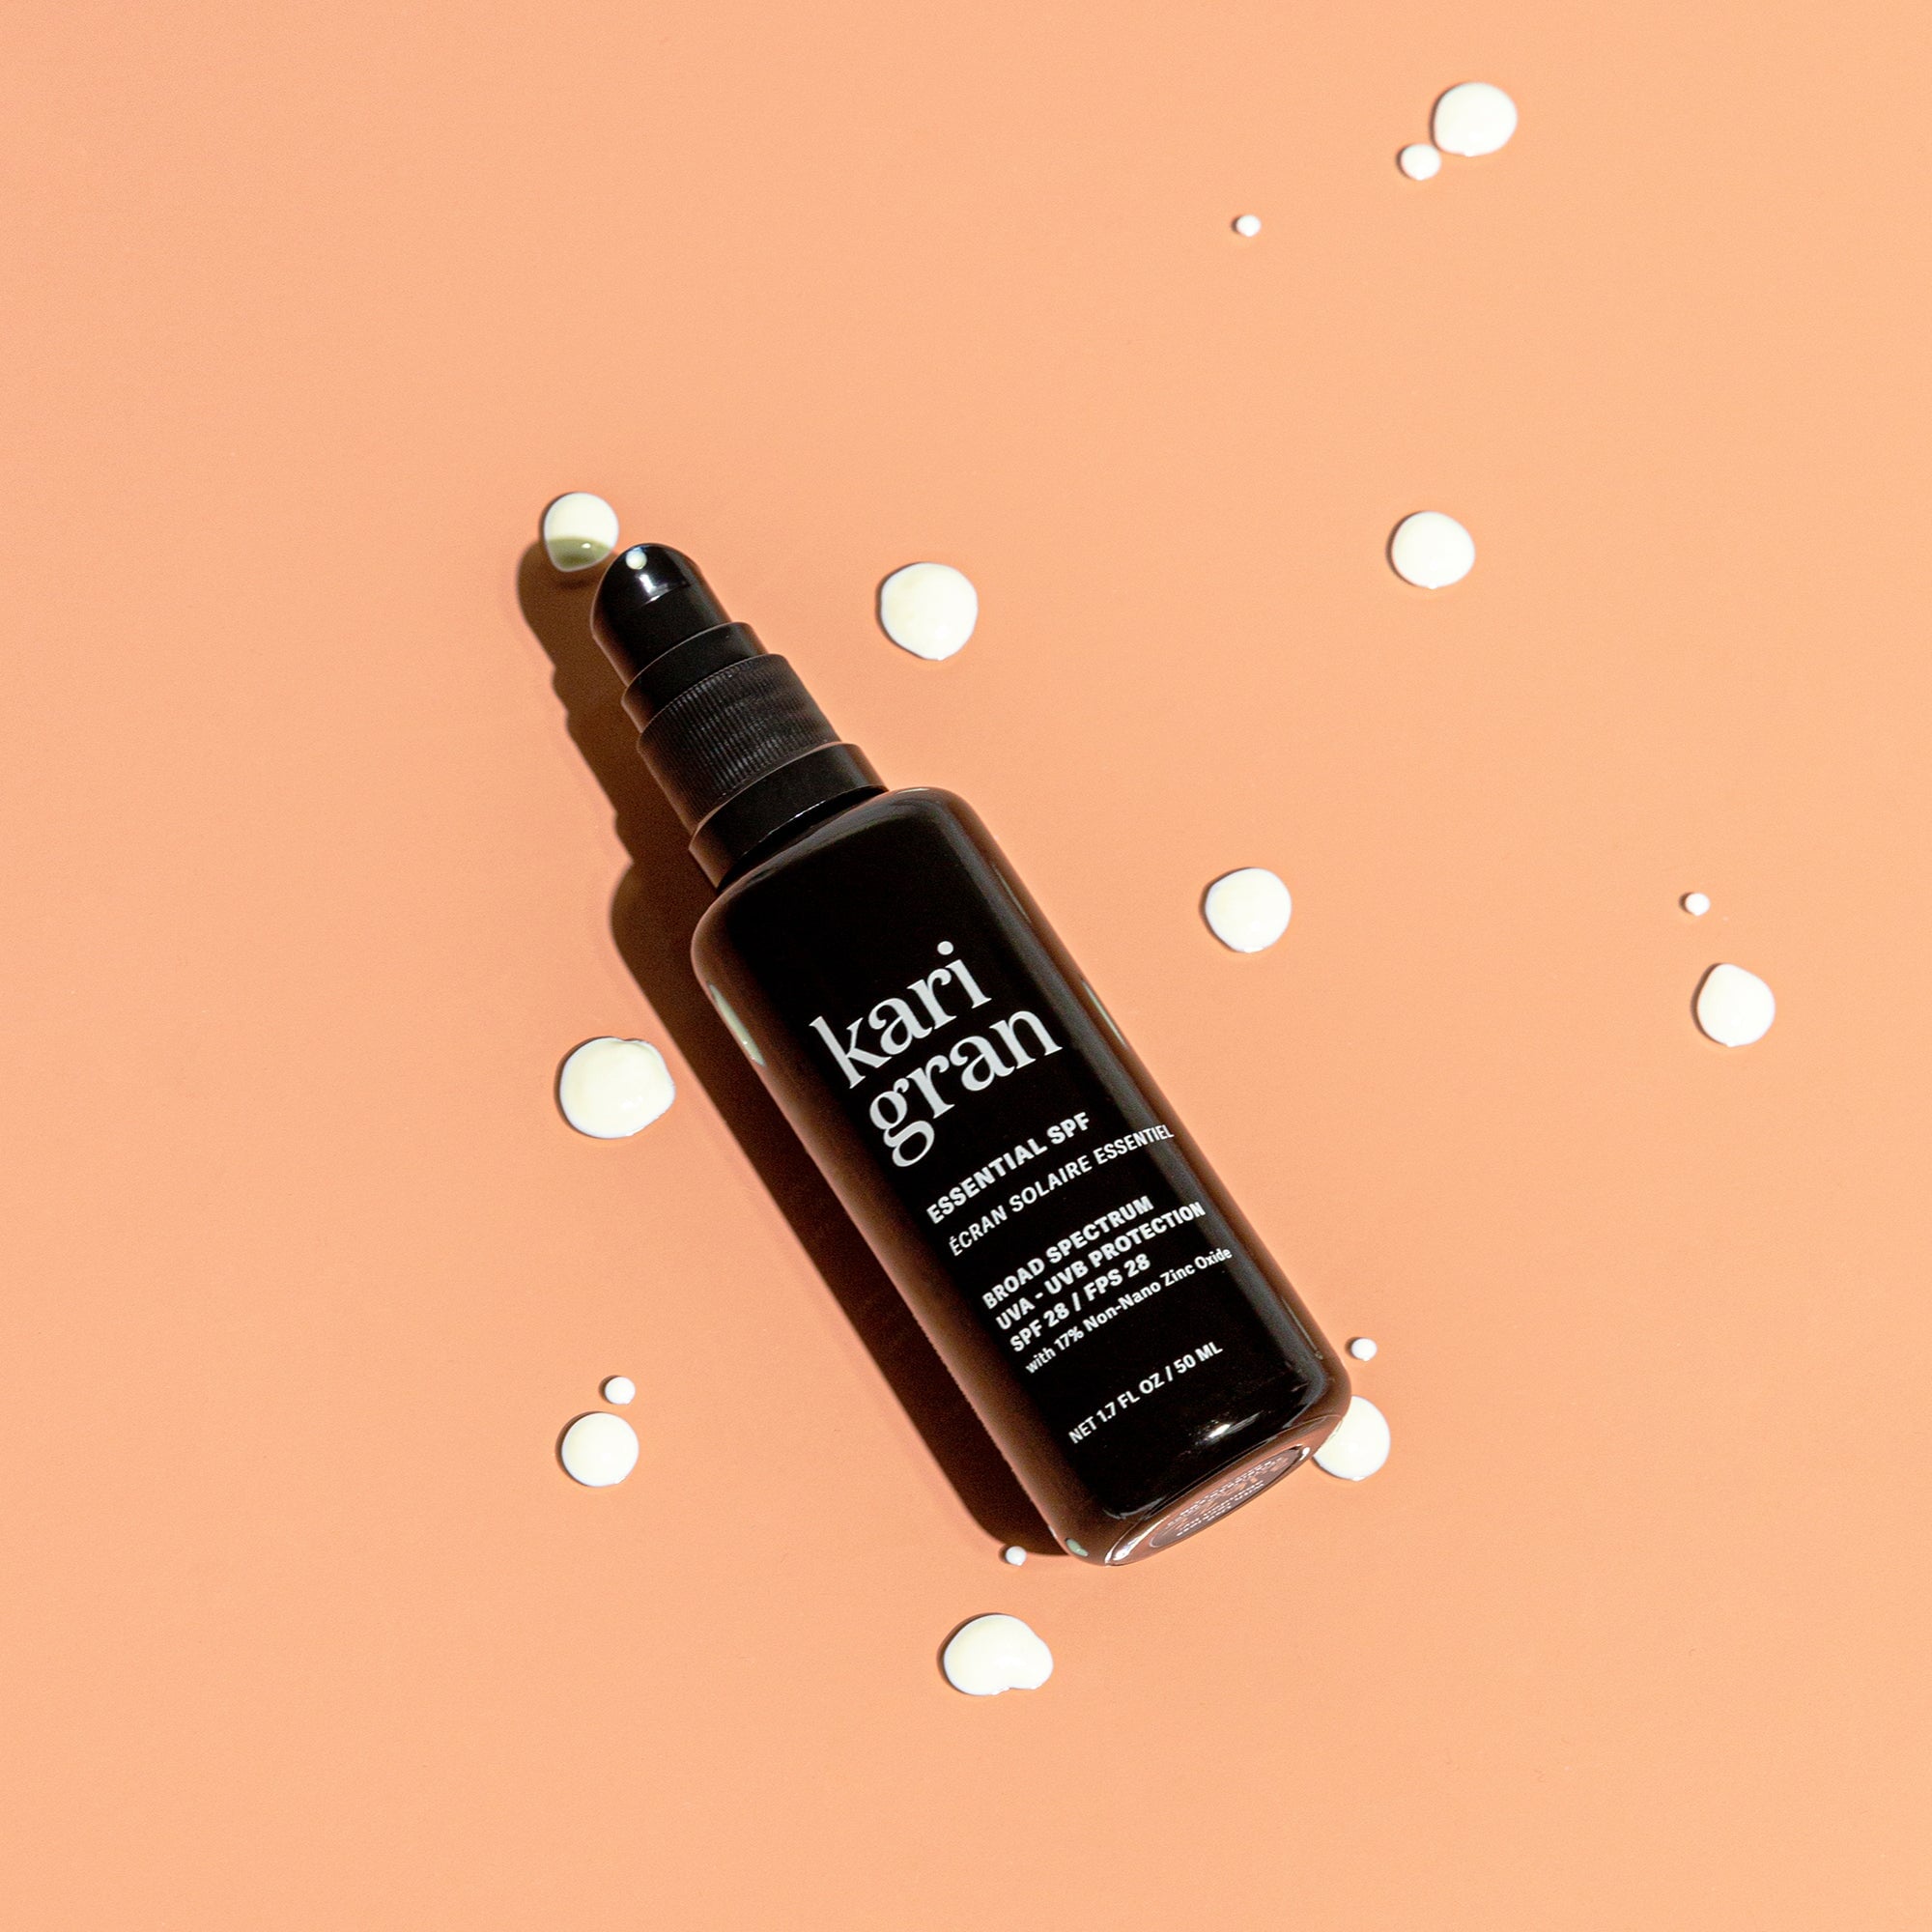 KG Essential SPF with droplets of the product surrounding the bottle